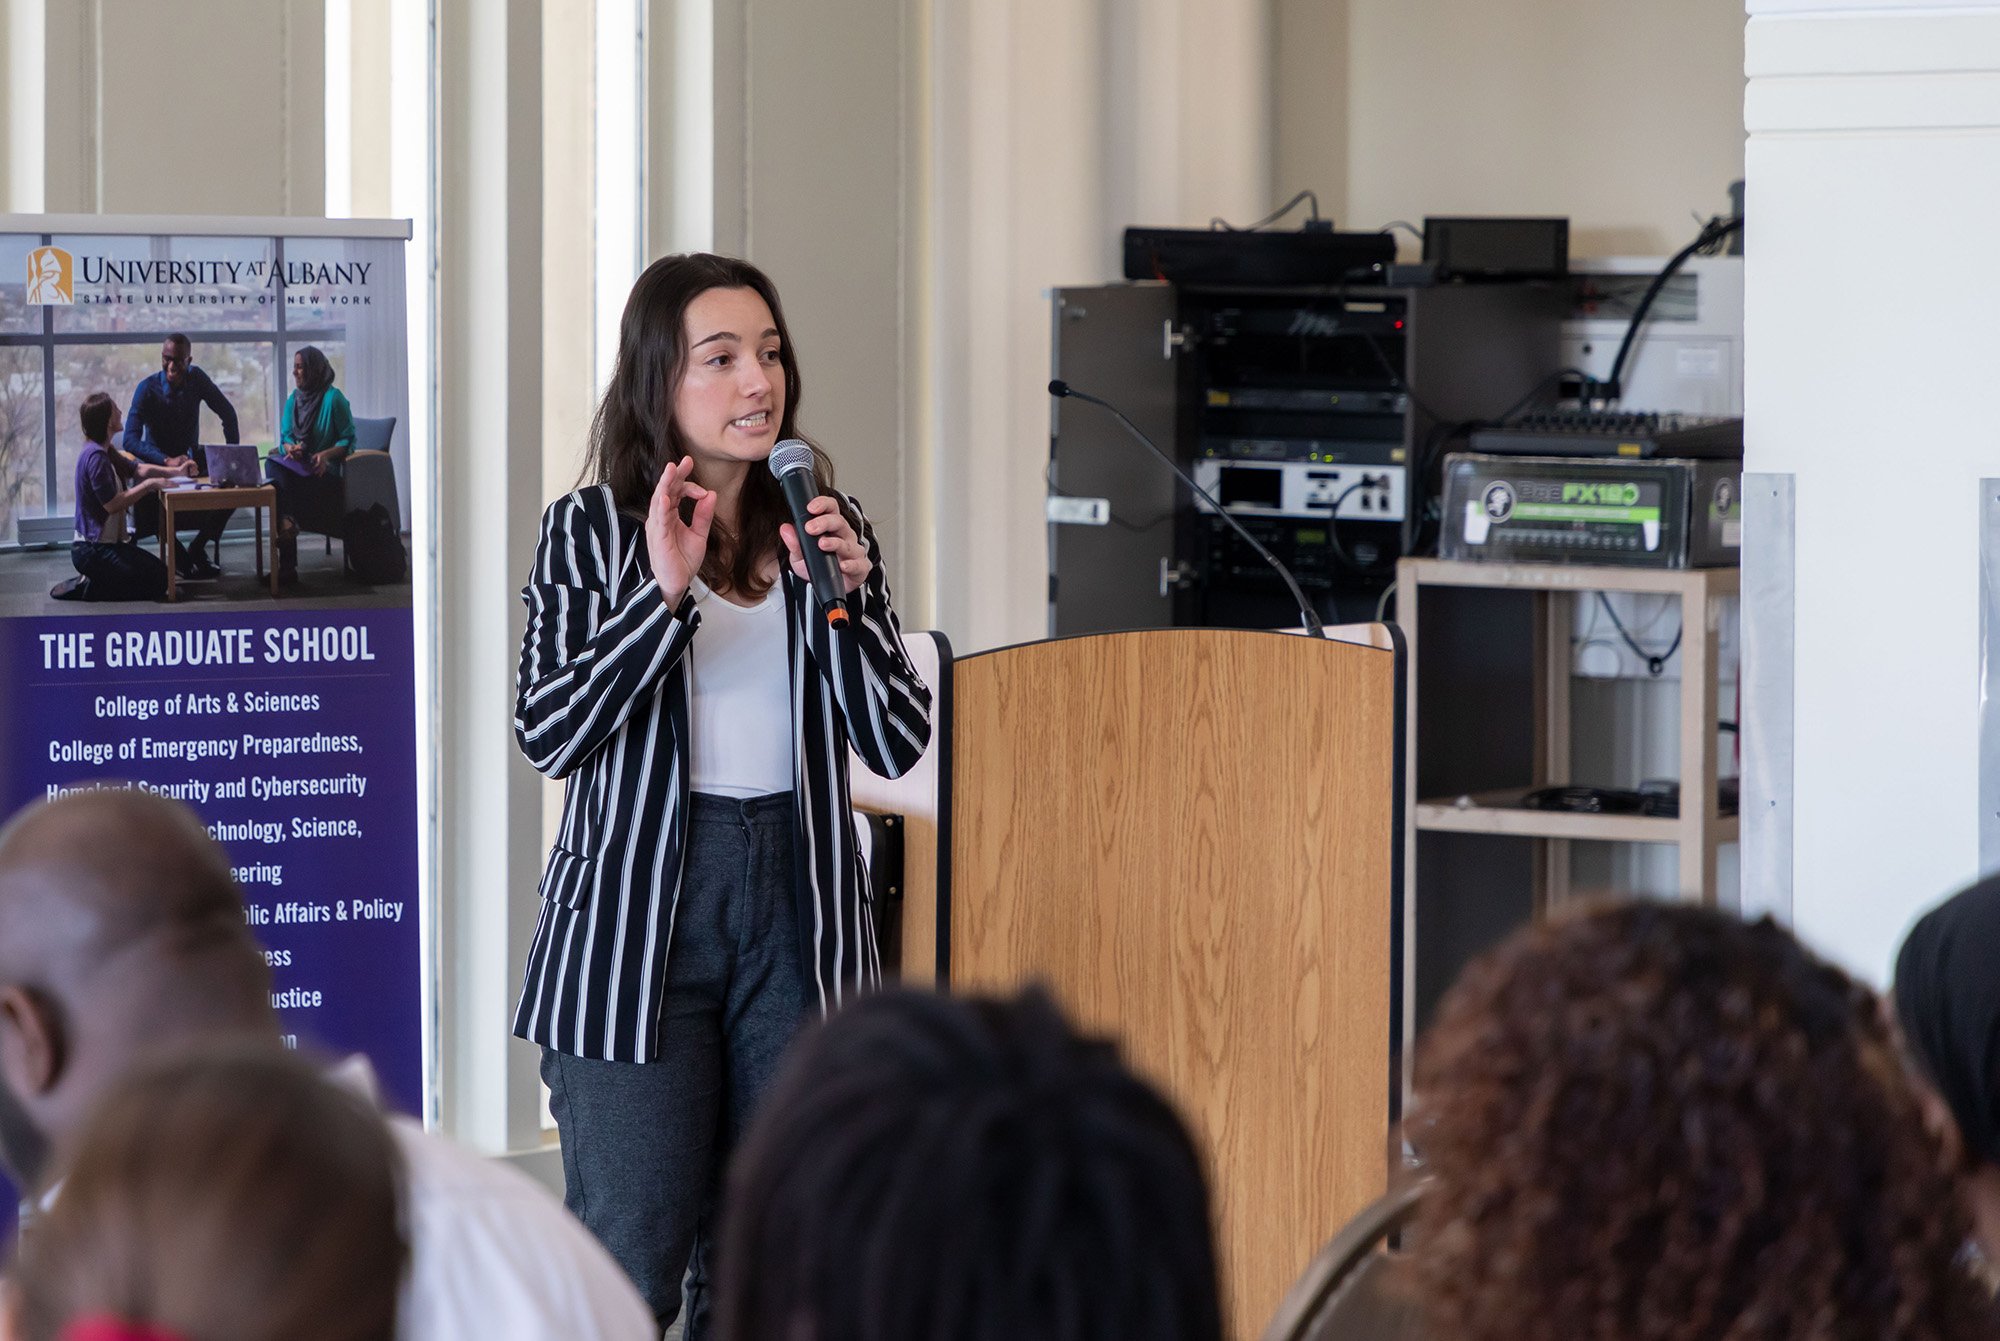 Manuela Montoya-Giraldo, a doctoral student in Biology, presents at the 3-Minute Thesis competition.